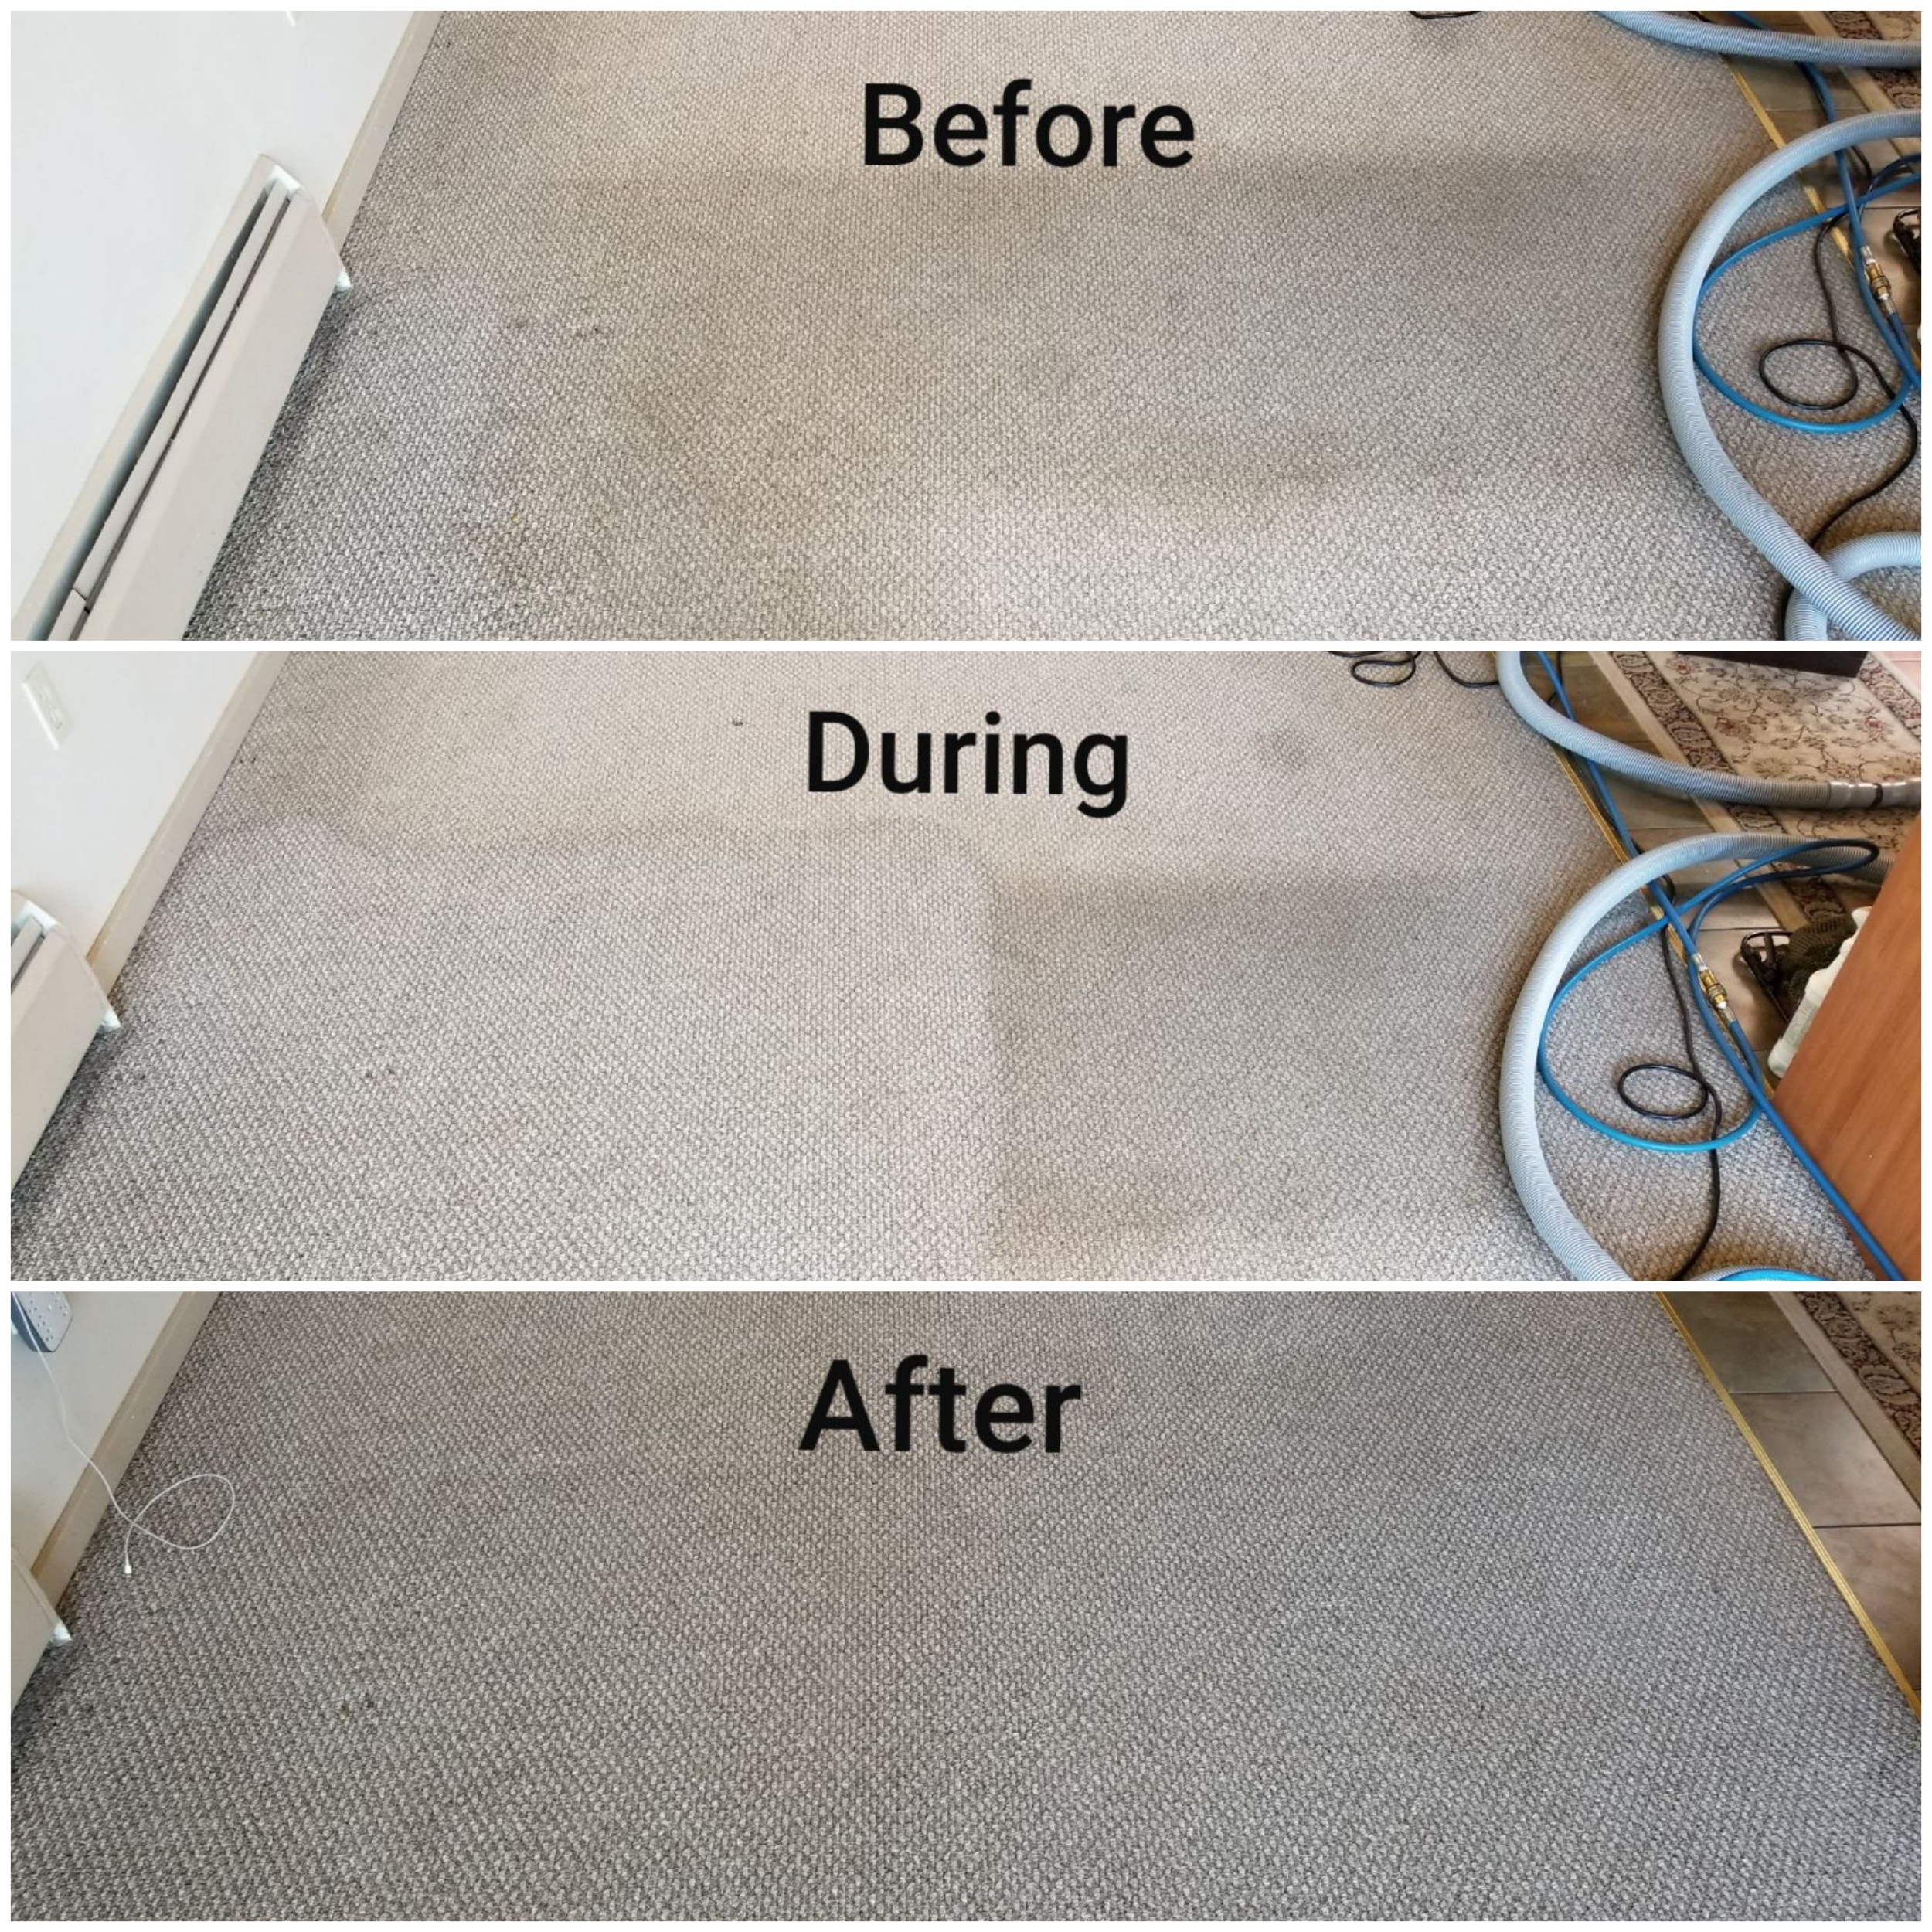 Carpet cleaning services victoria